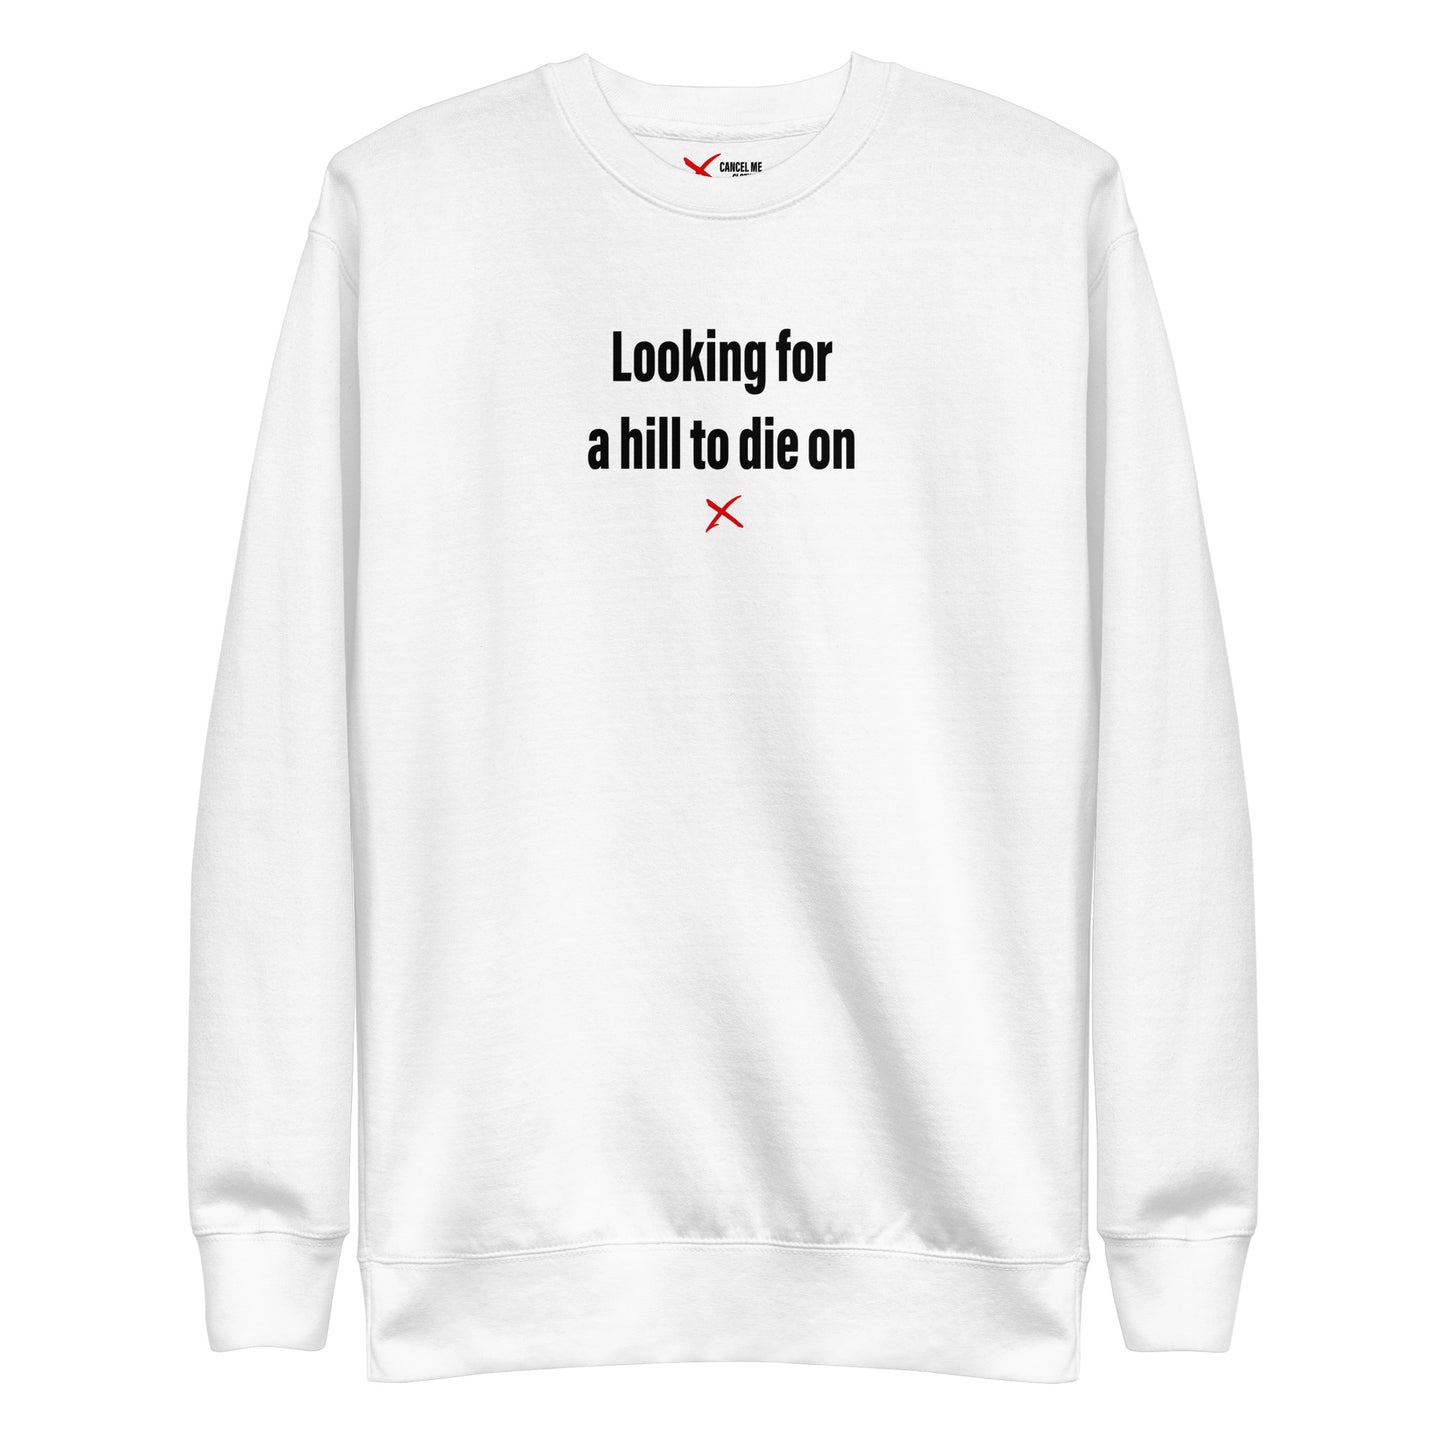 Looking for a hill to die on - Sweatshirt